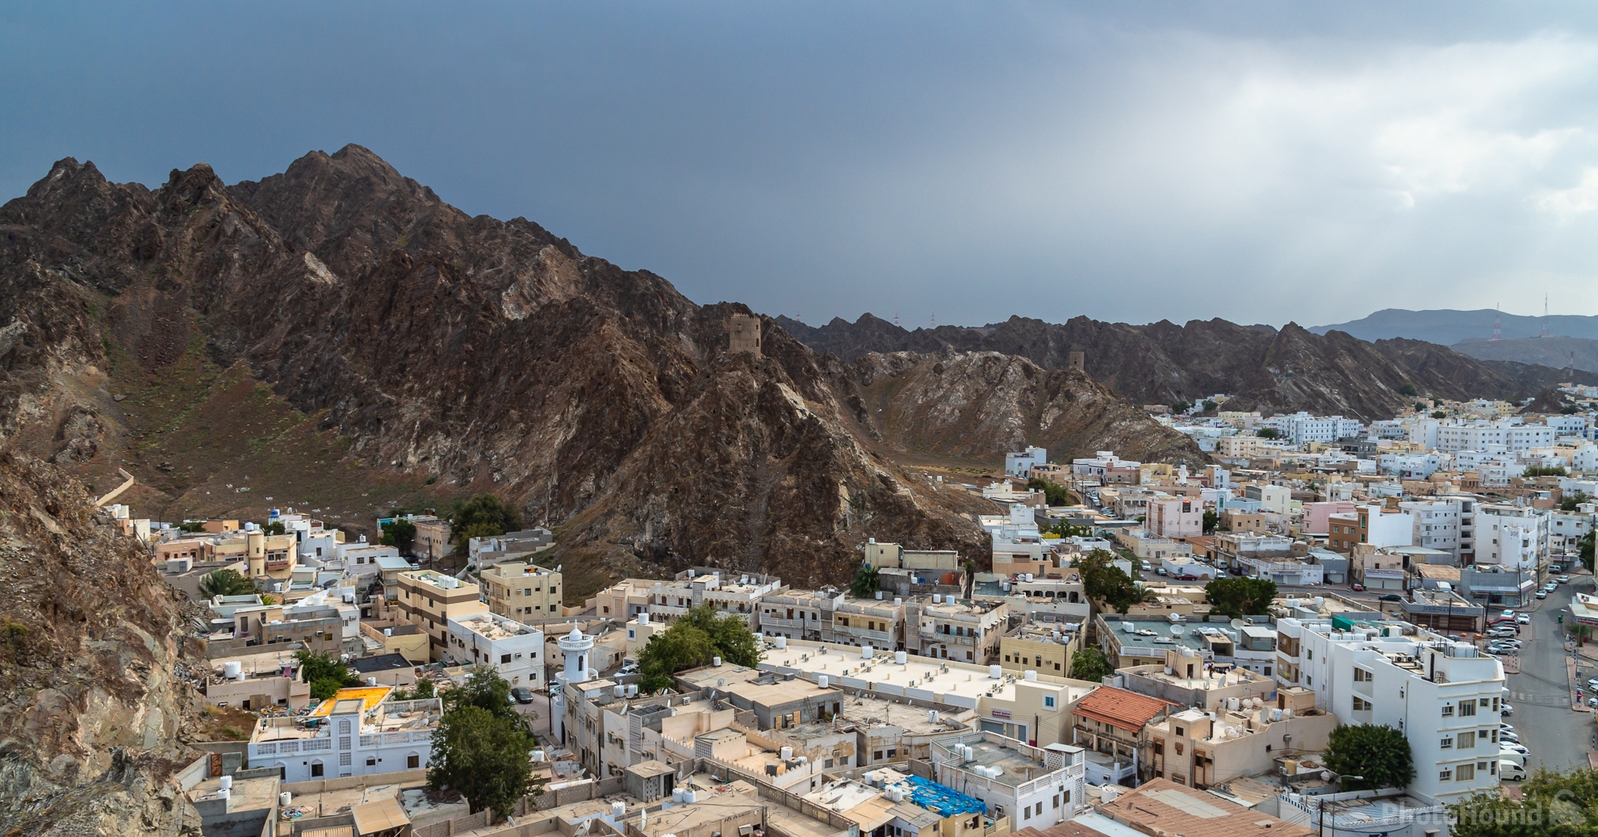 Image of Views from Mutrah Fort (قلعة مطرح) by Sue Wolfe